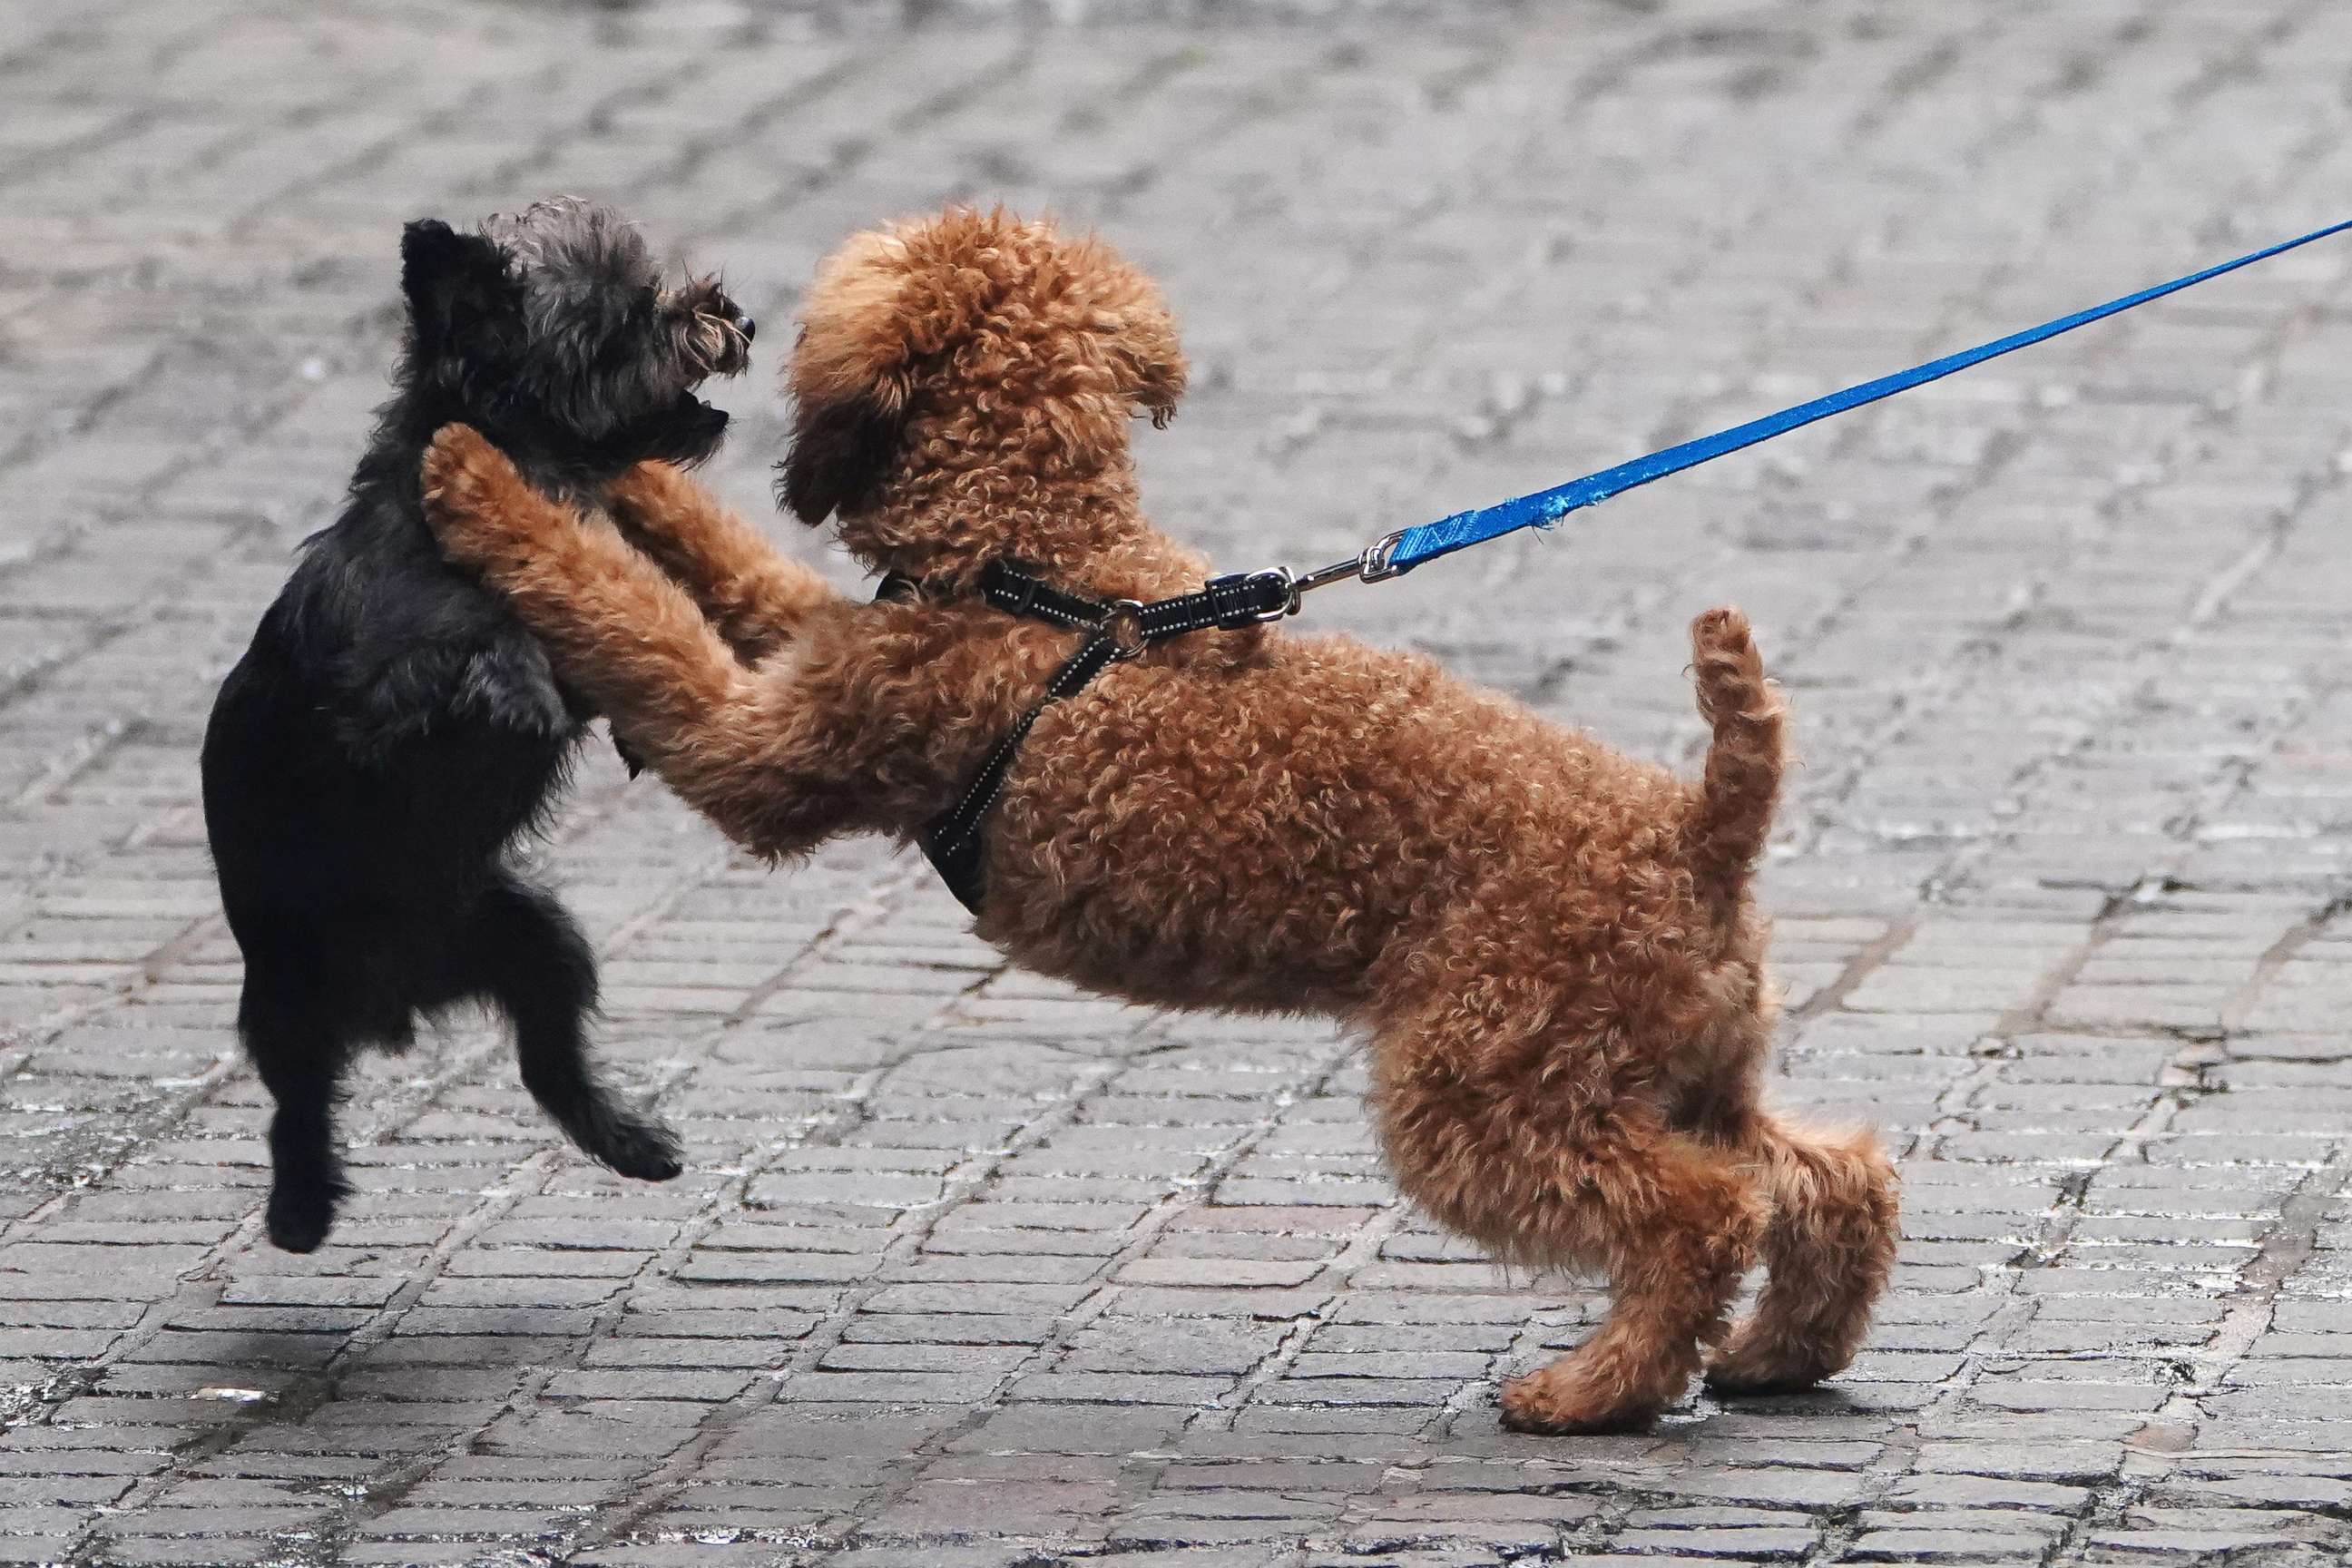 PHOTO: Dogs tussle and play on the cobblestones of Wall Street in the Manhattan borough of New York City, New York, U.S., Oct. 2, 2020.